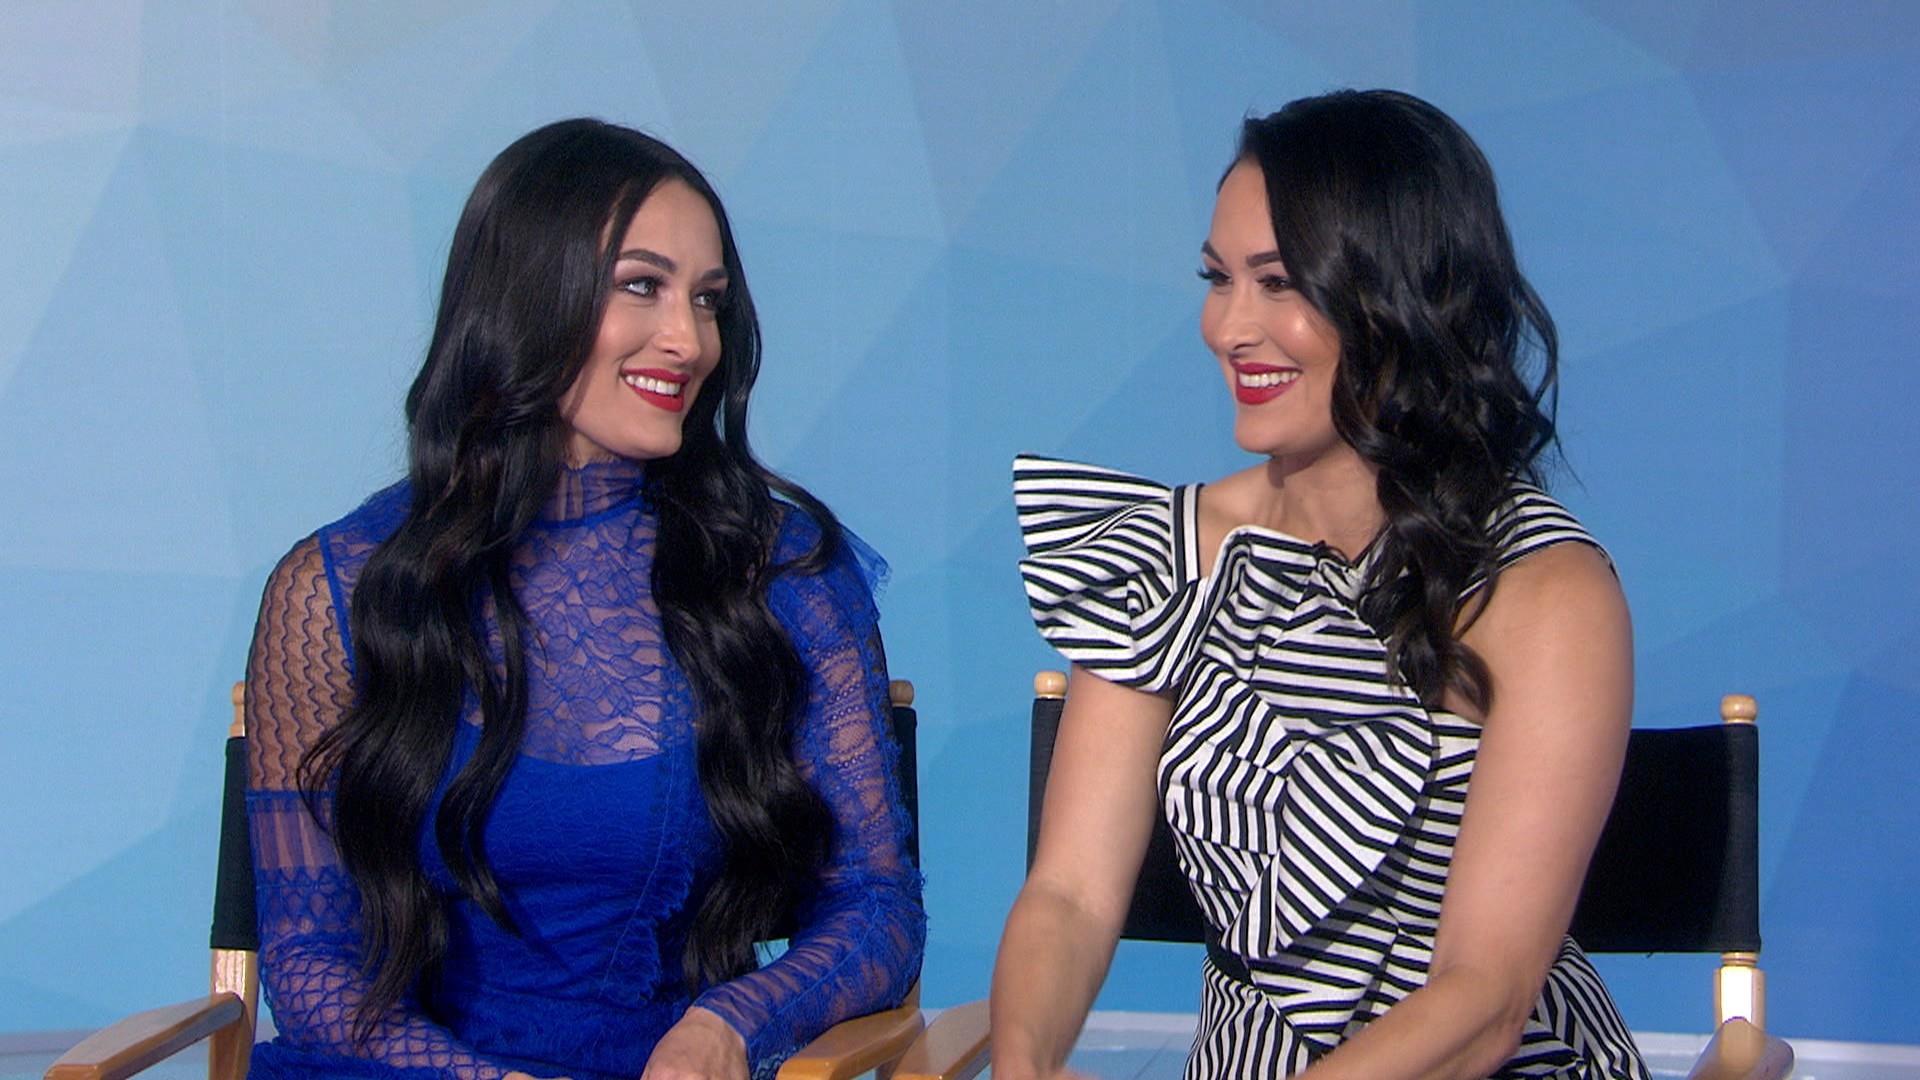 ‘Total Bellas’ Brie and Nikki Bella talk about John Cena and their show - TODAY.com1920 x 1080